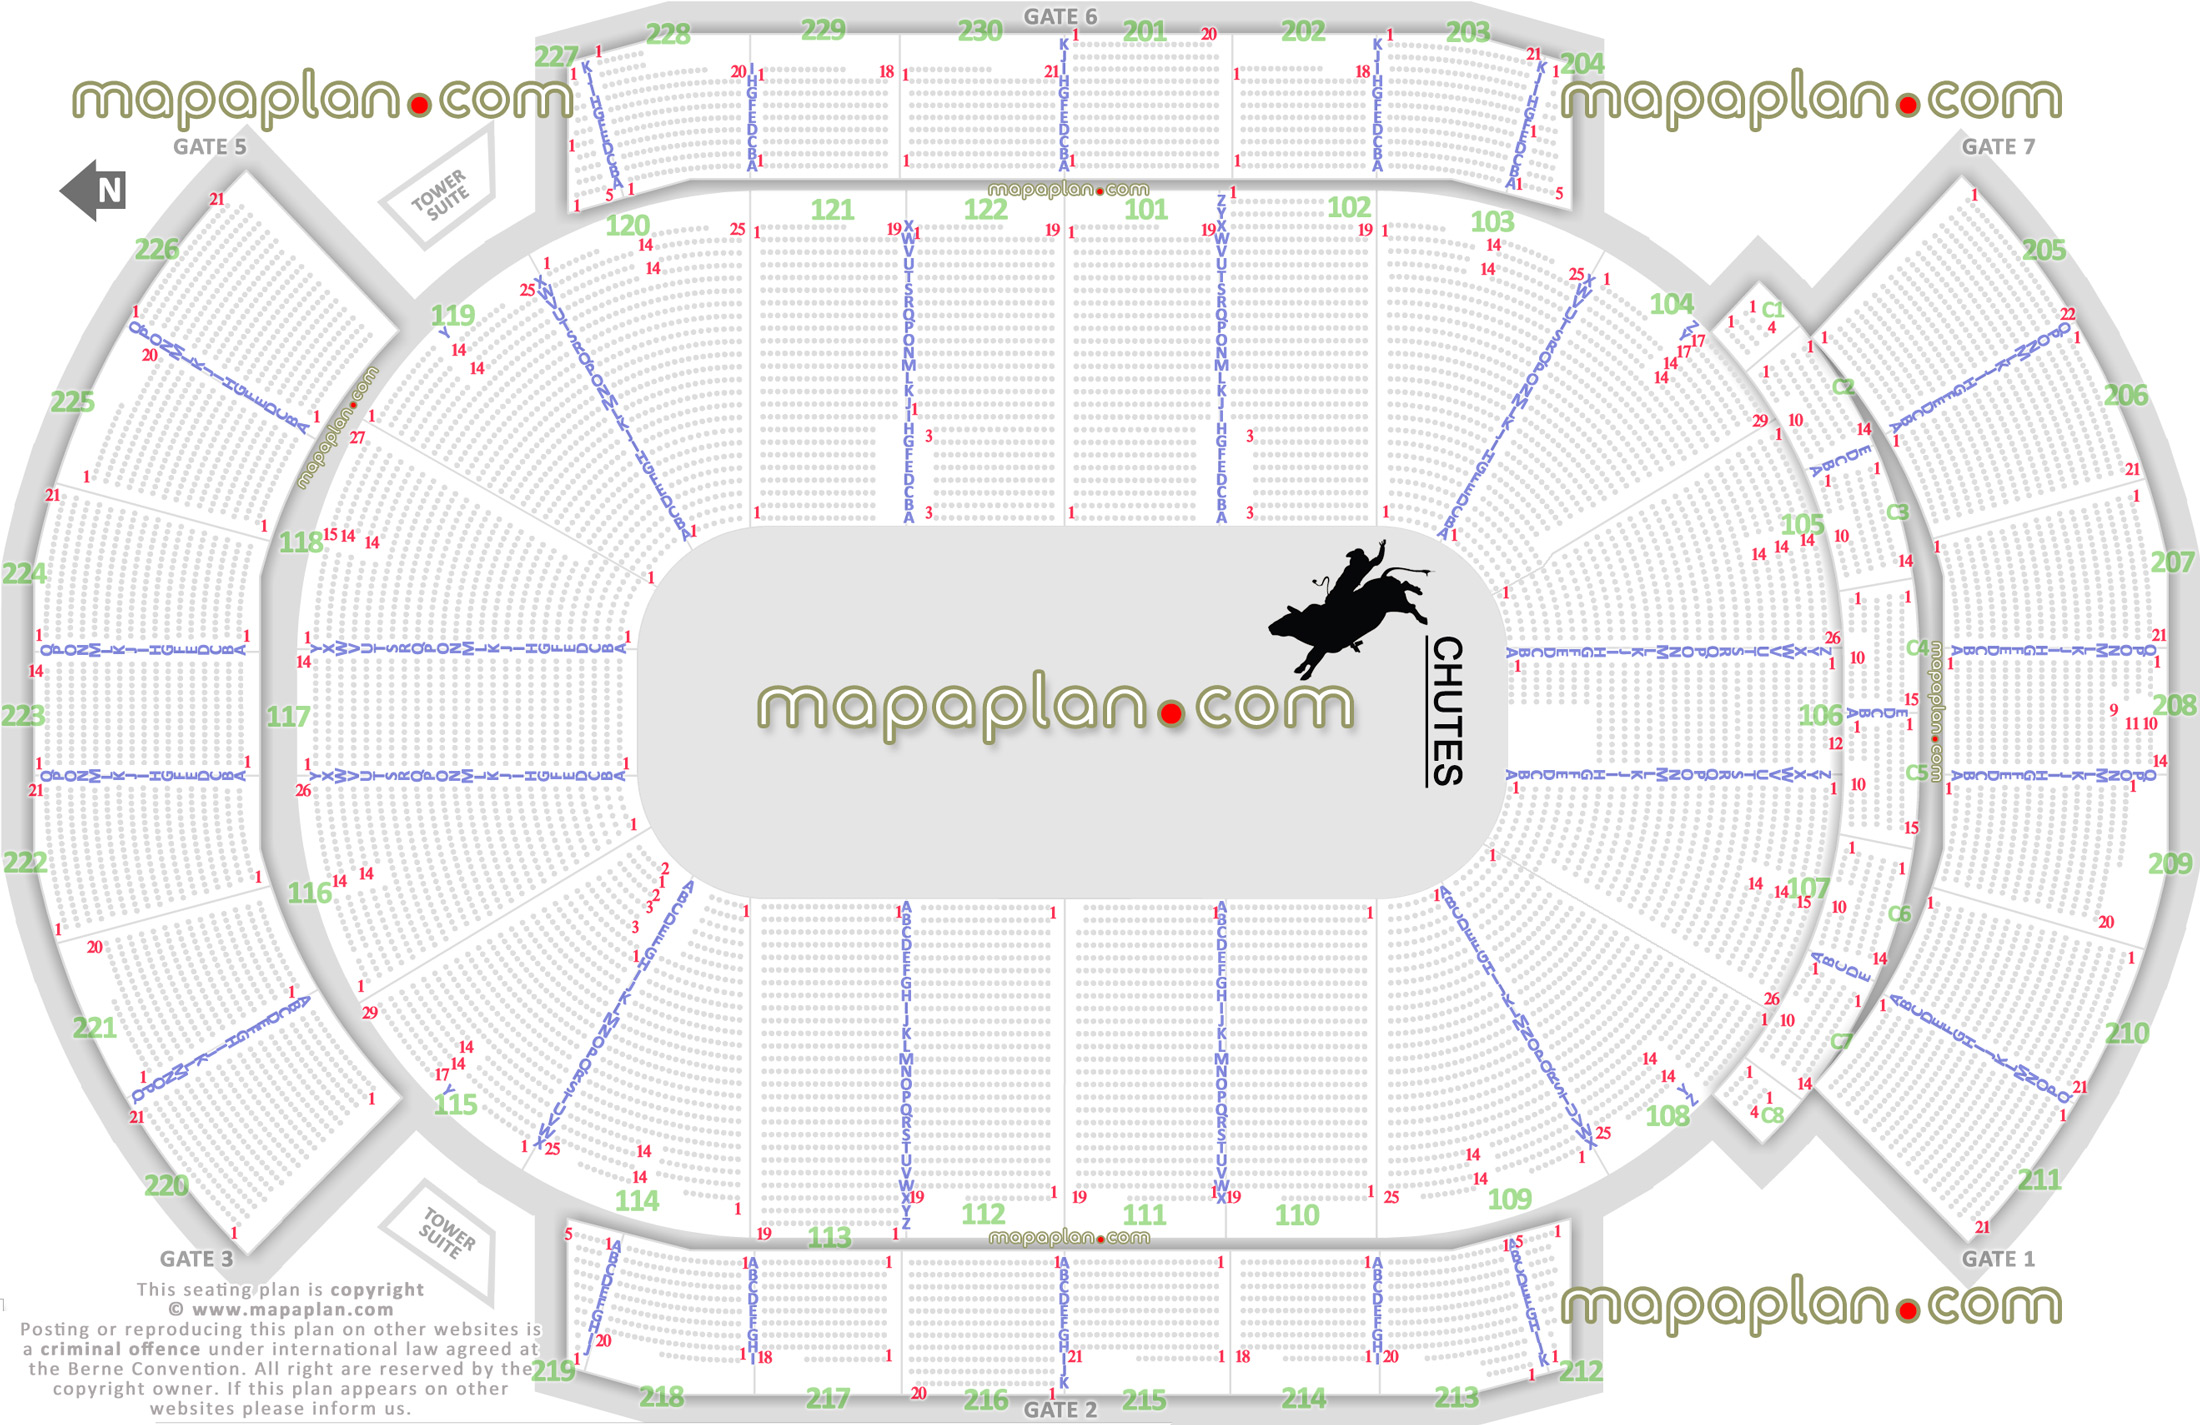 pbr professional bull riders rodeo glendale phoenix arizona seating chart row max seat capacity numbers rows each section detailed plan lower club executive suites upper level sections 201 202 203 204 205 206 207 208 209 210 211 212 213 214 215 216 217 218 219 220 221 222 223 224 225 226 227 228 229 230 Glendale Gila River Arena seating chart